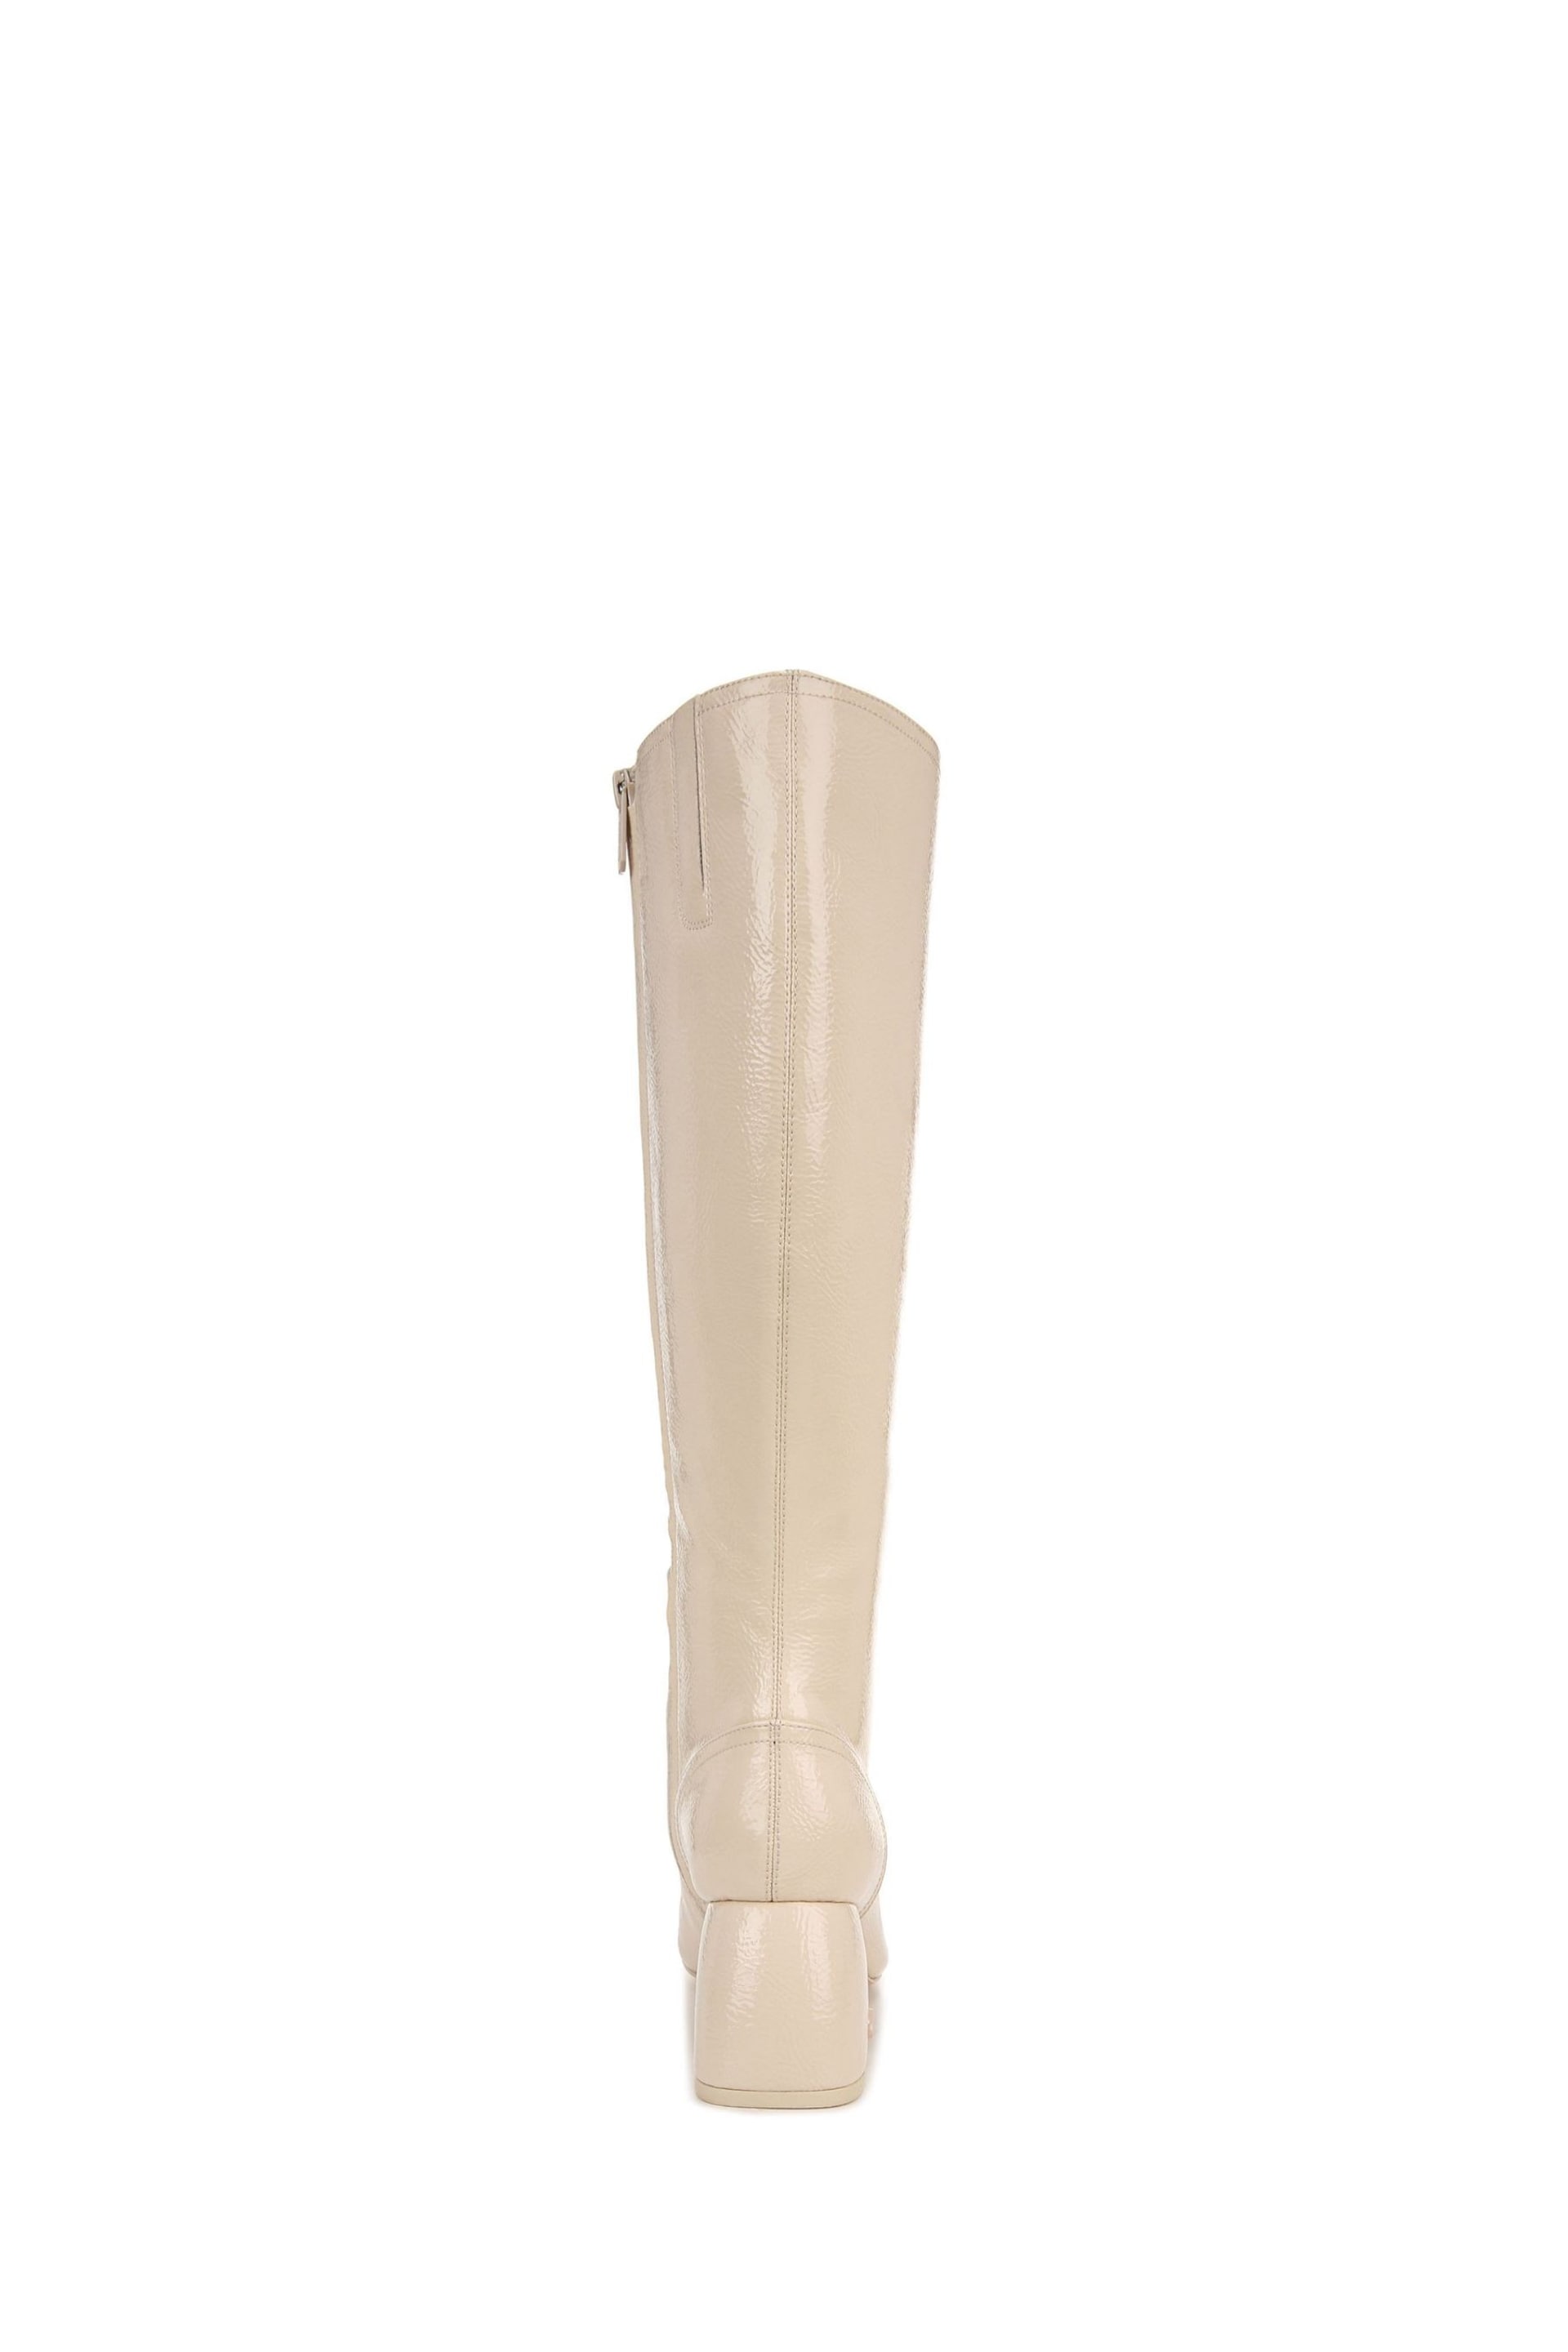 Circus NY Cream Olympia Knee High Boots - Image 4 of 7